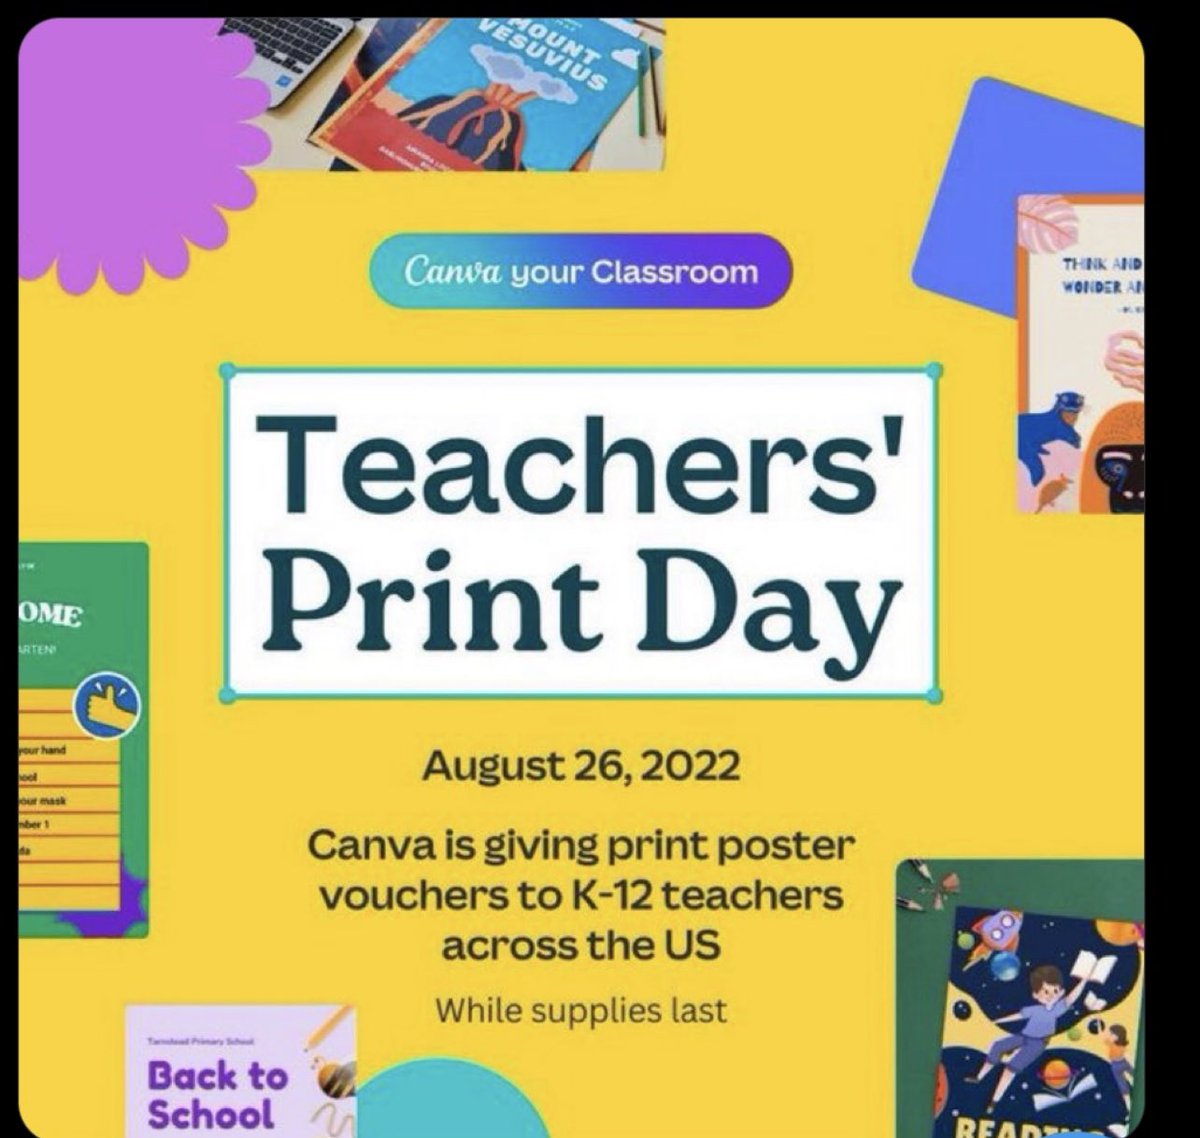 If you’re an educator using a @canva educational account, don’t forget to print your free poster today! ($25 Value)  Code: BACKTOSCHOOL22